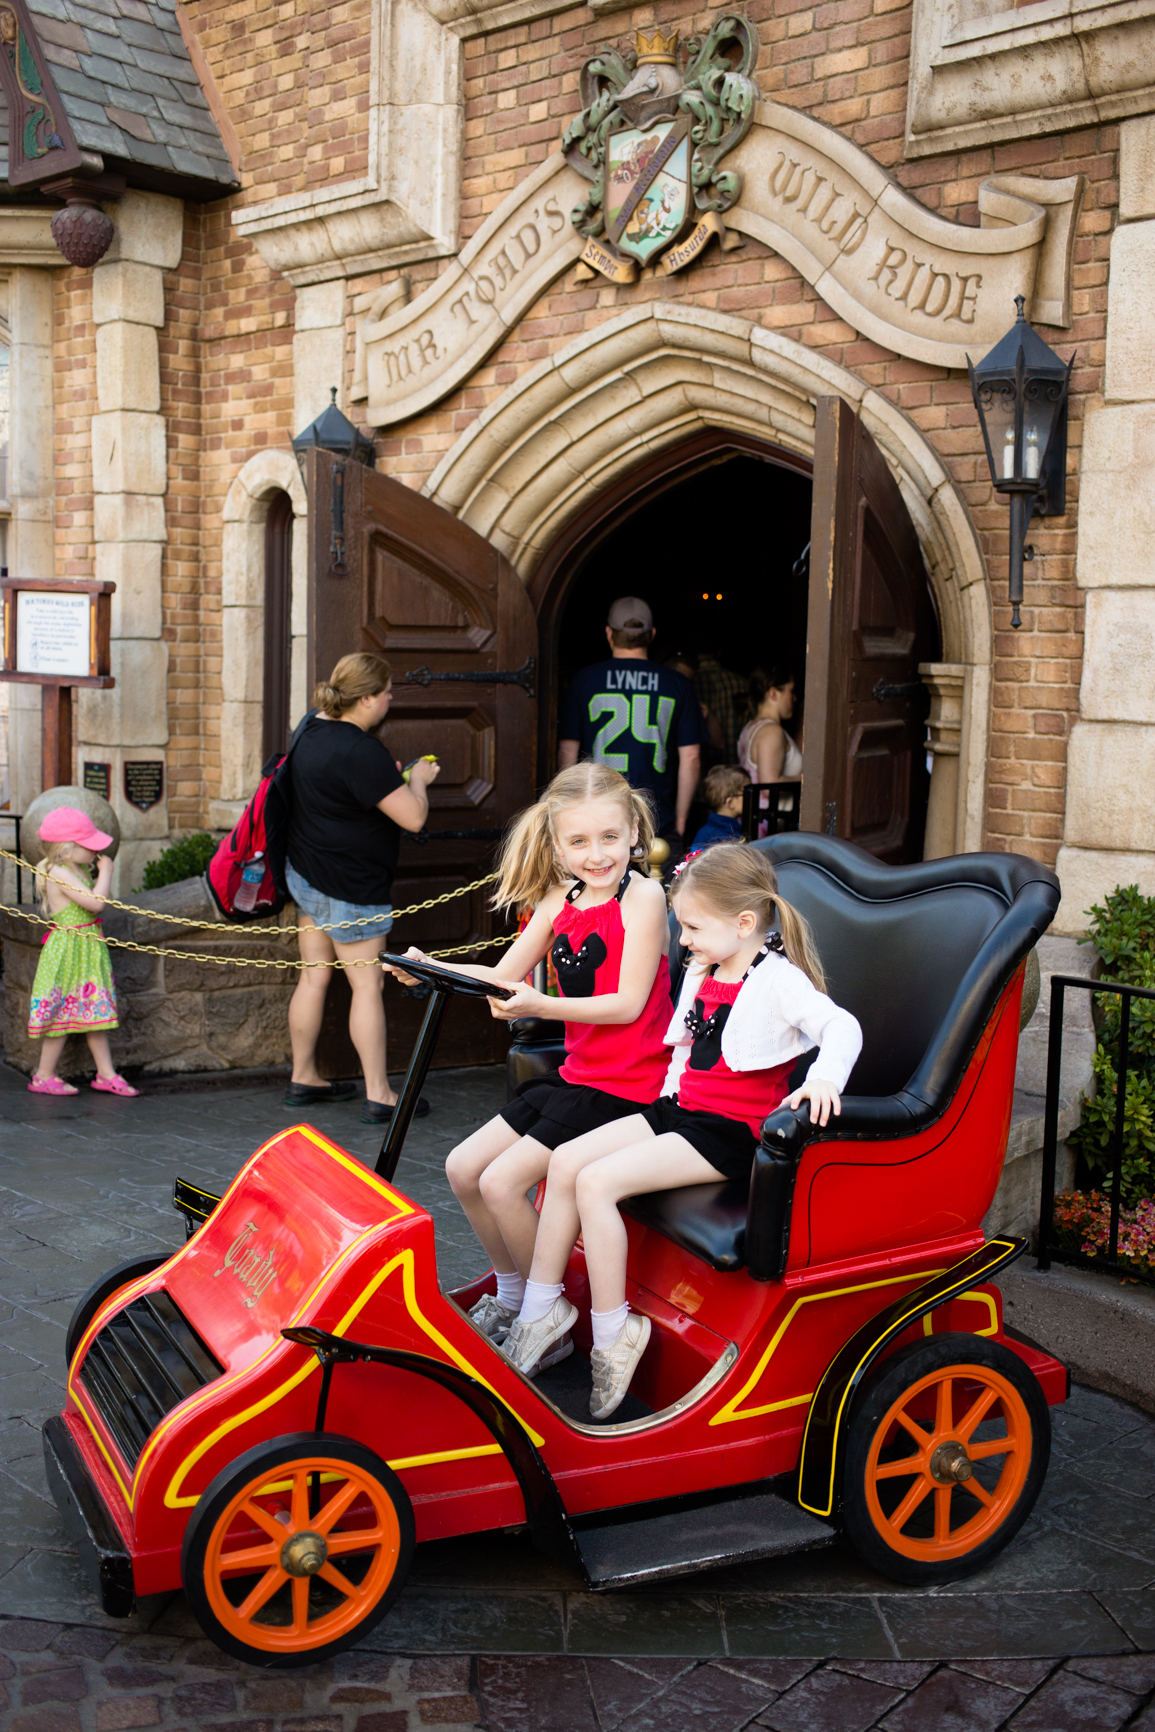 Two girls sit in a sample red car outside the ride.